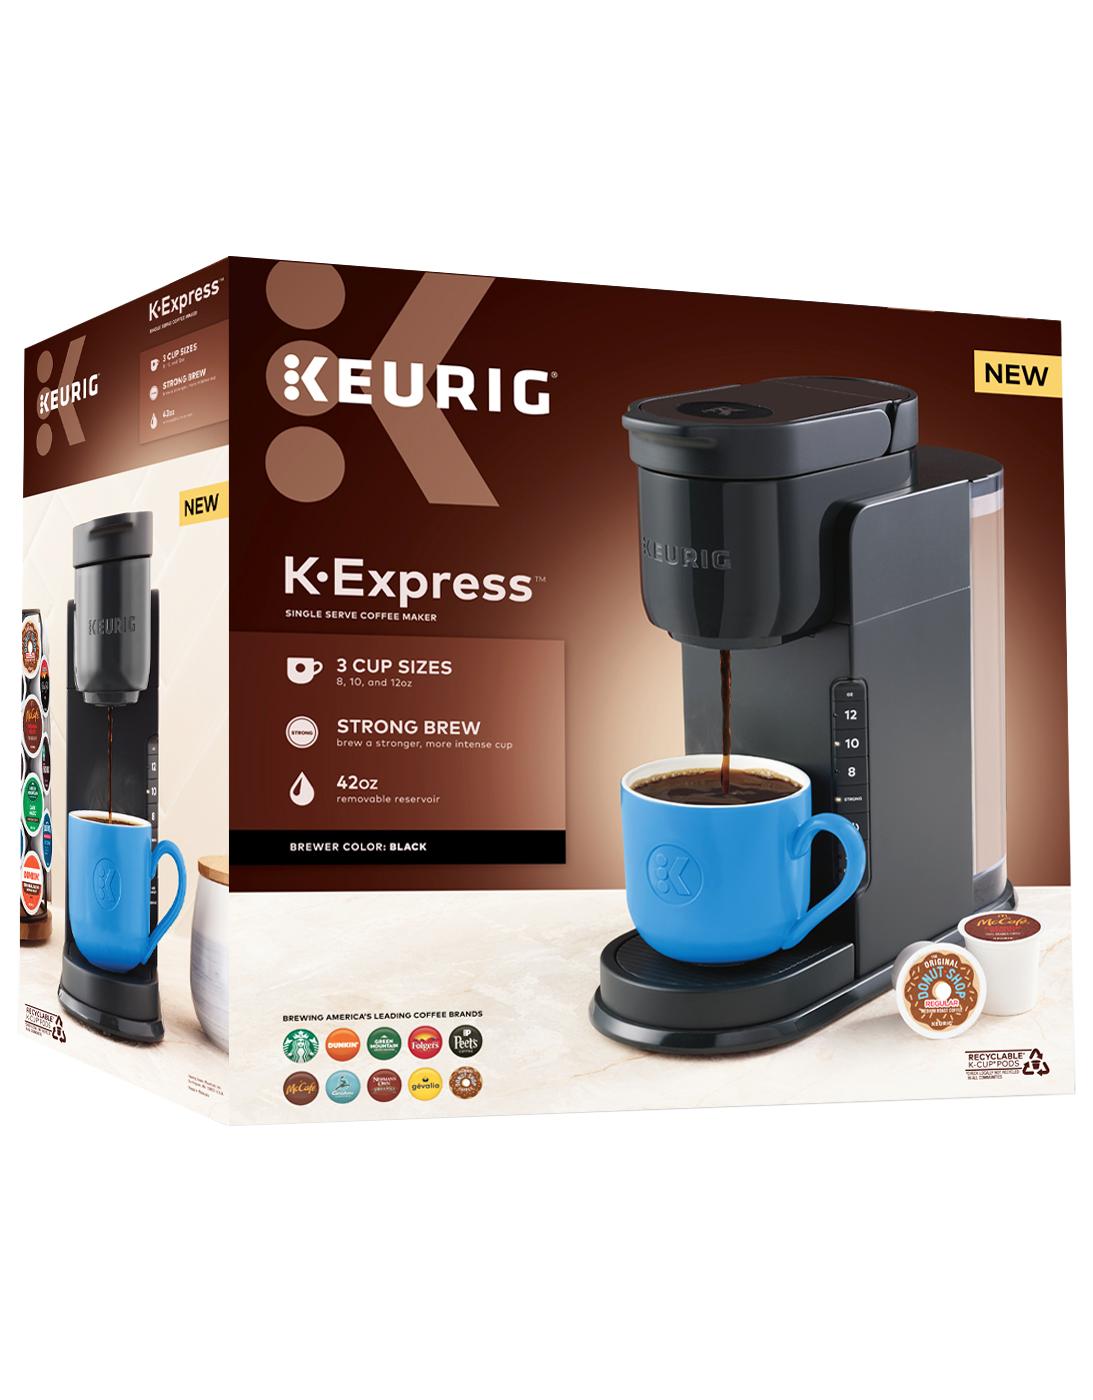 What's The Deal With Keurig Cup Sizes?